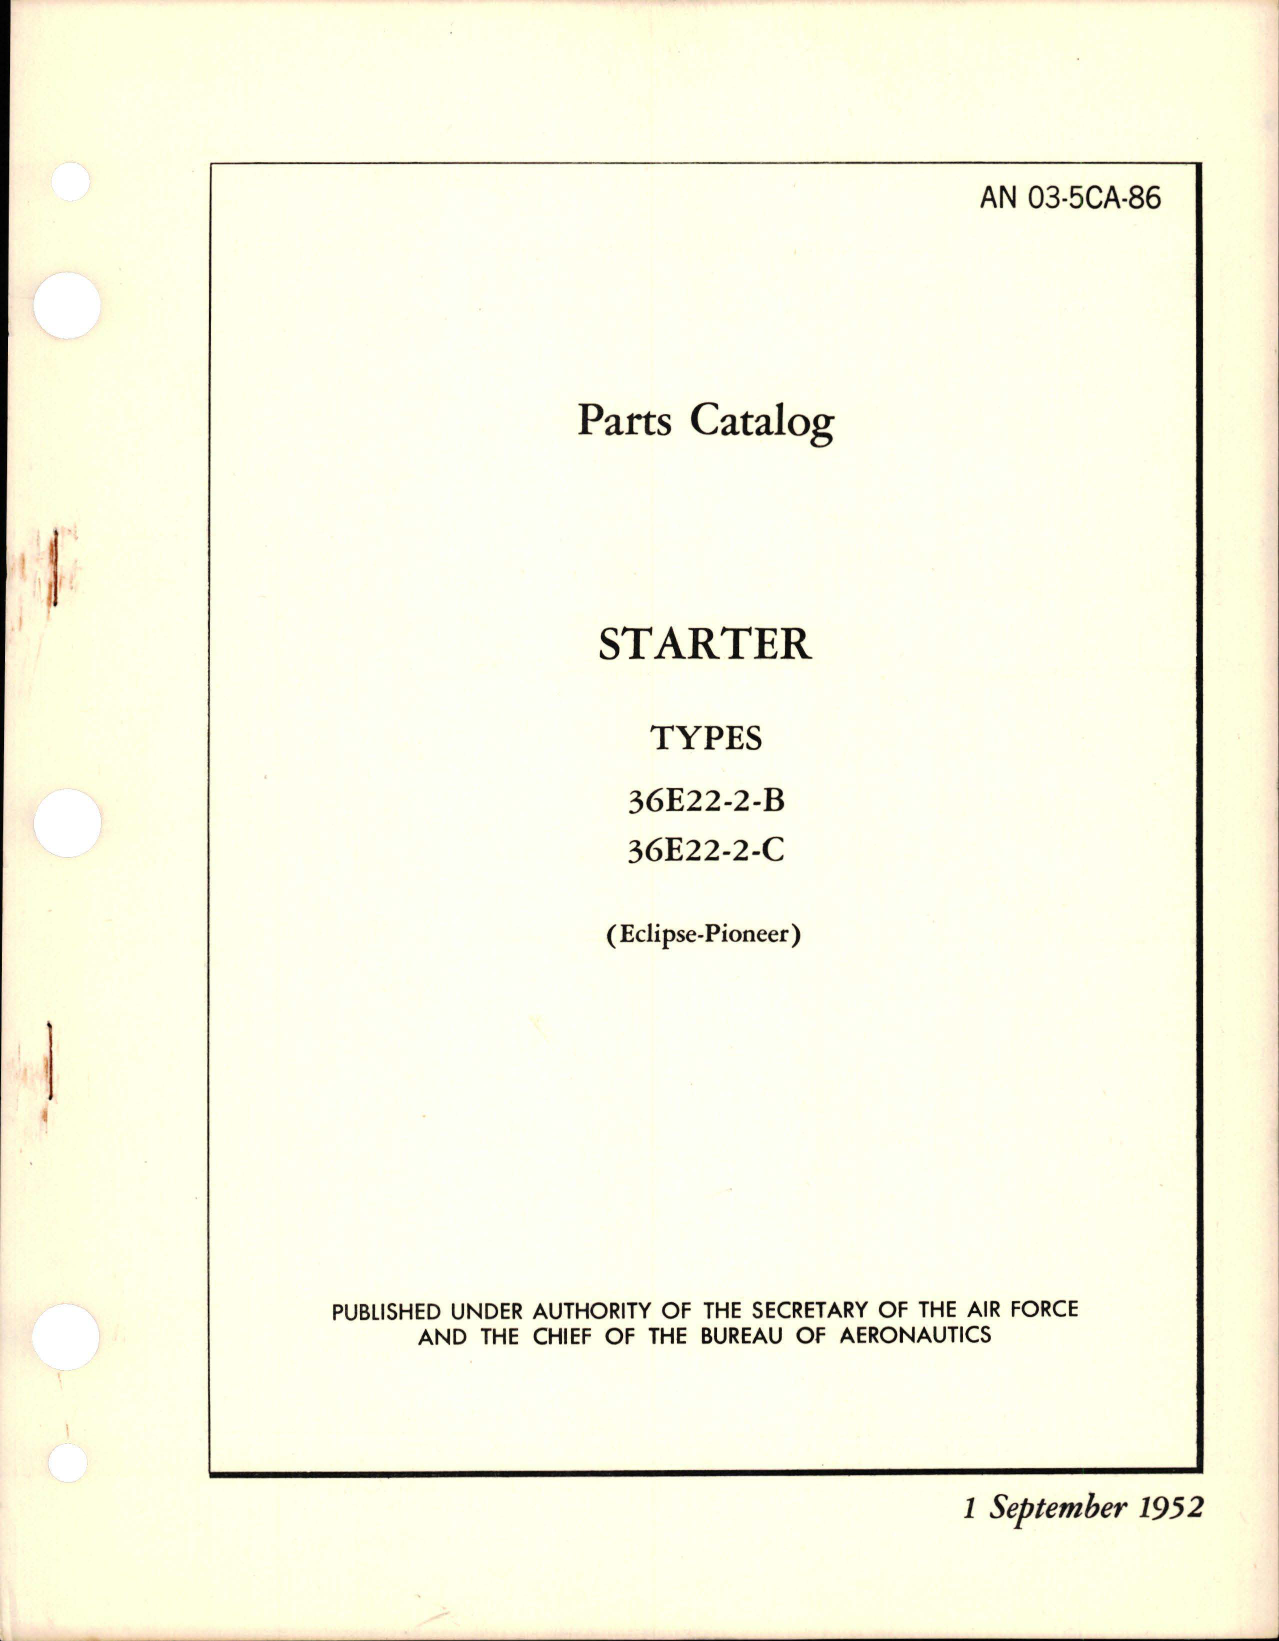 Sample page 1 from AirCorps Library document: Parts Catalog for Starter - Types 36E22-2-B and 36E22-2-C 